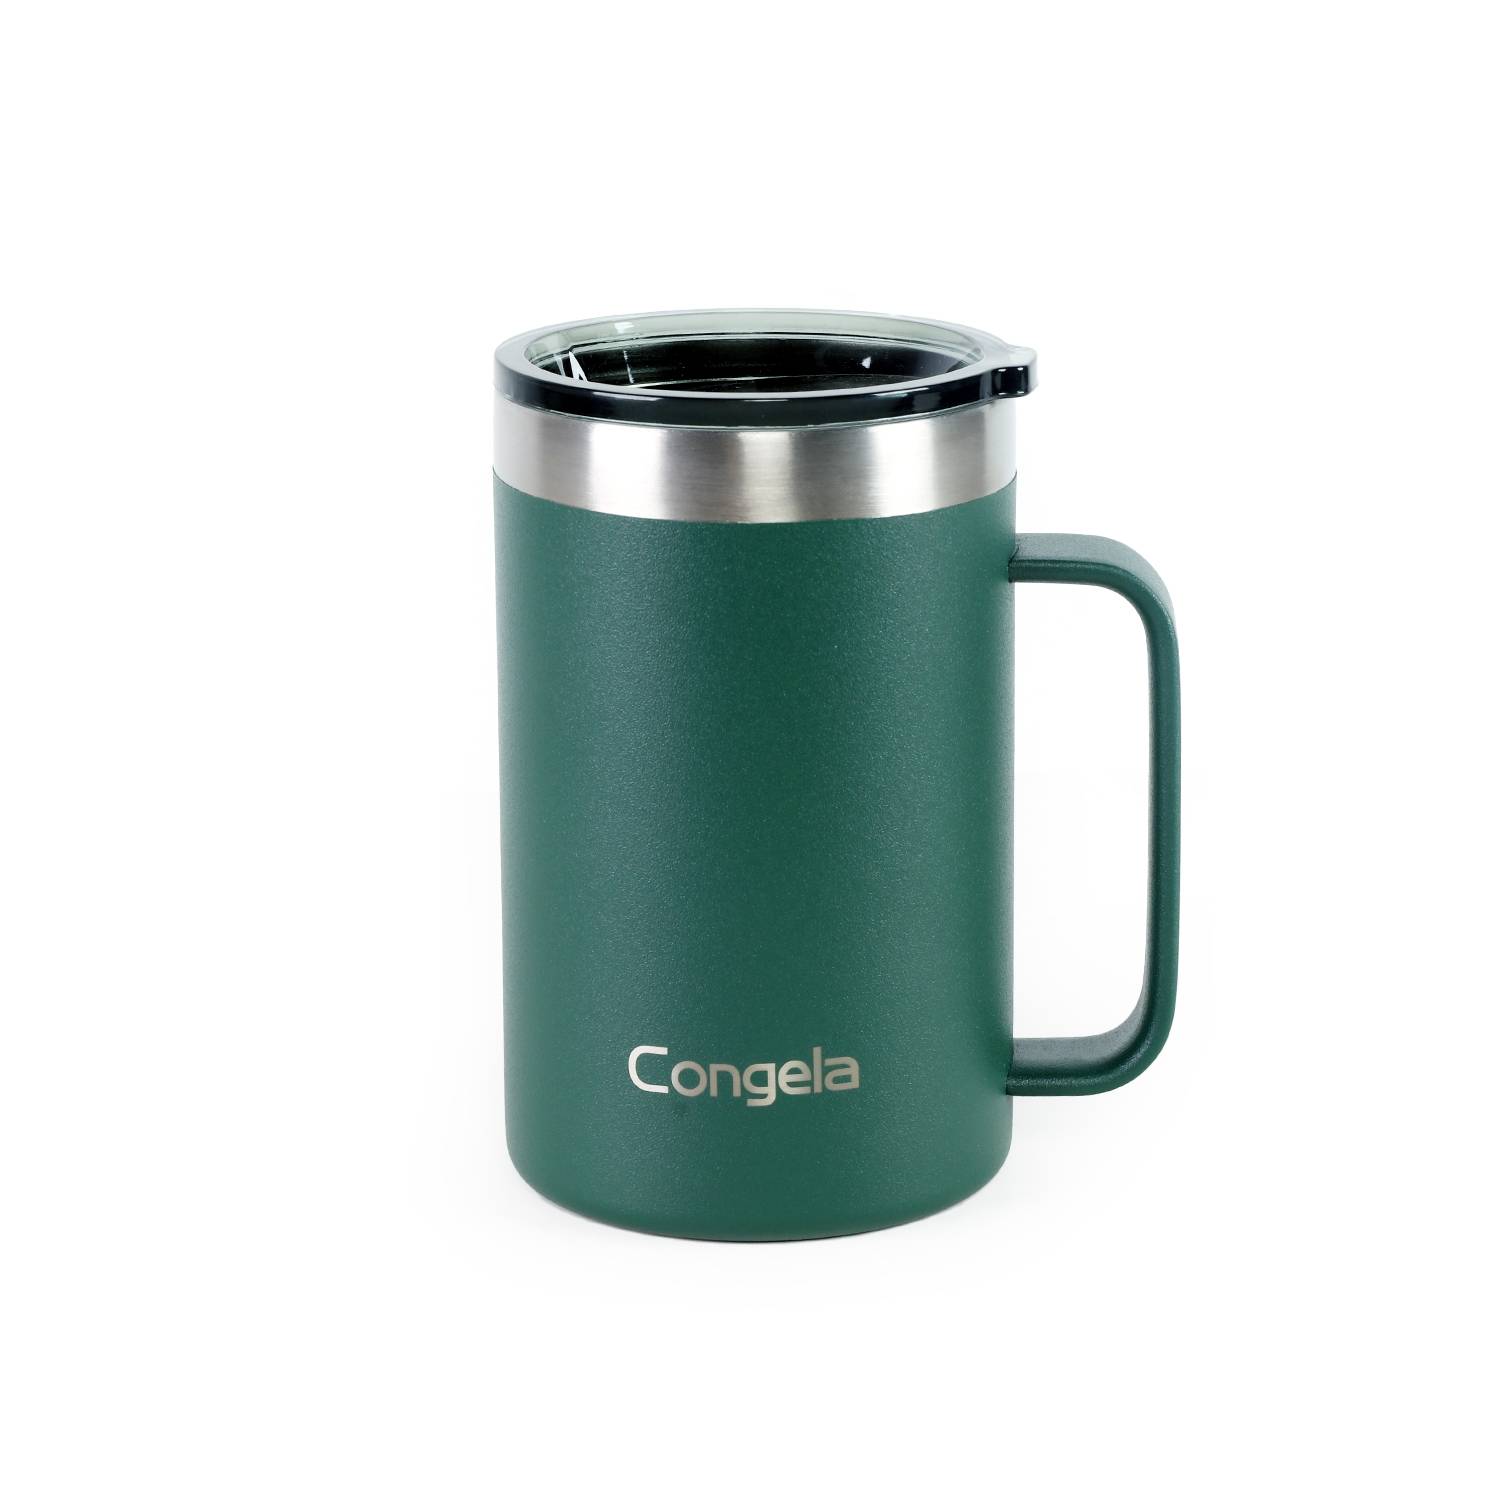 Congela 18oz Stainless steel insulated coffee mug with handle, tea cup with  Tritan lid and Cement co…See more Congela 18oz Stainless steel insulated